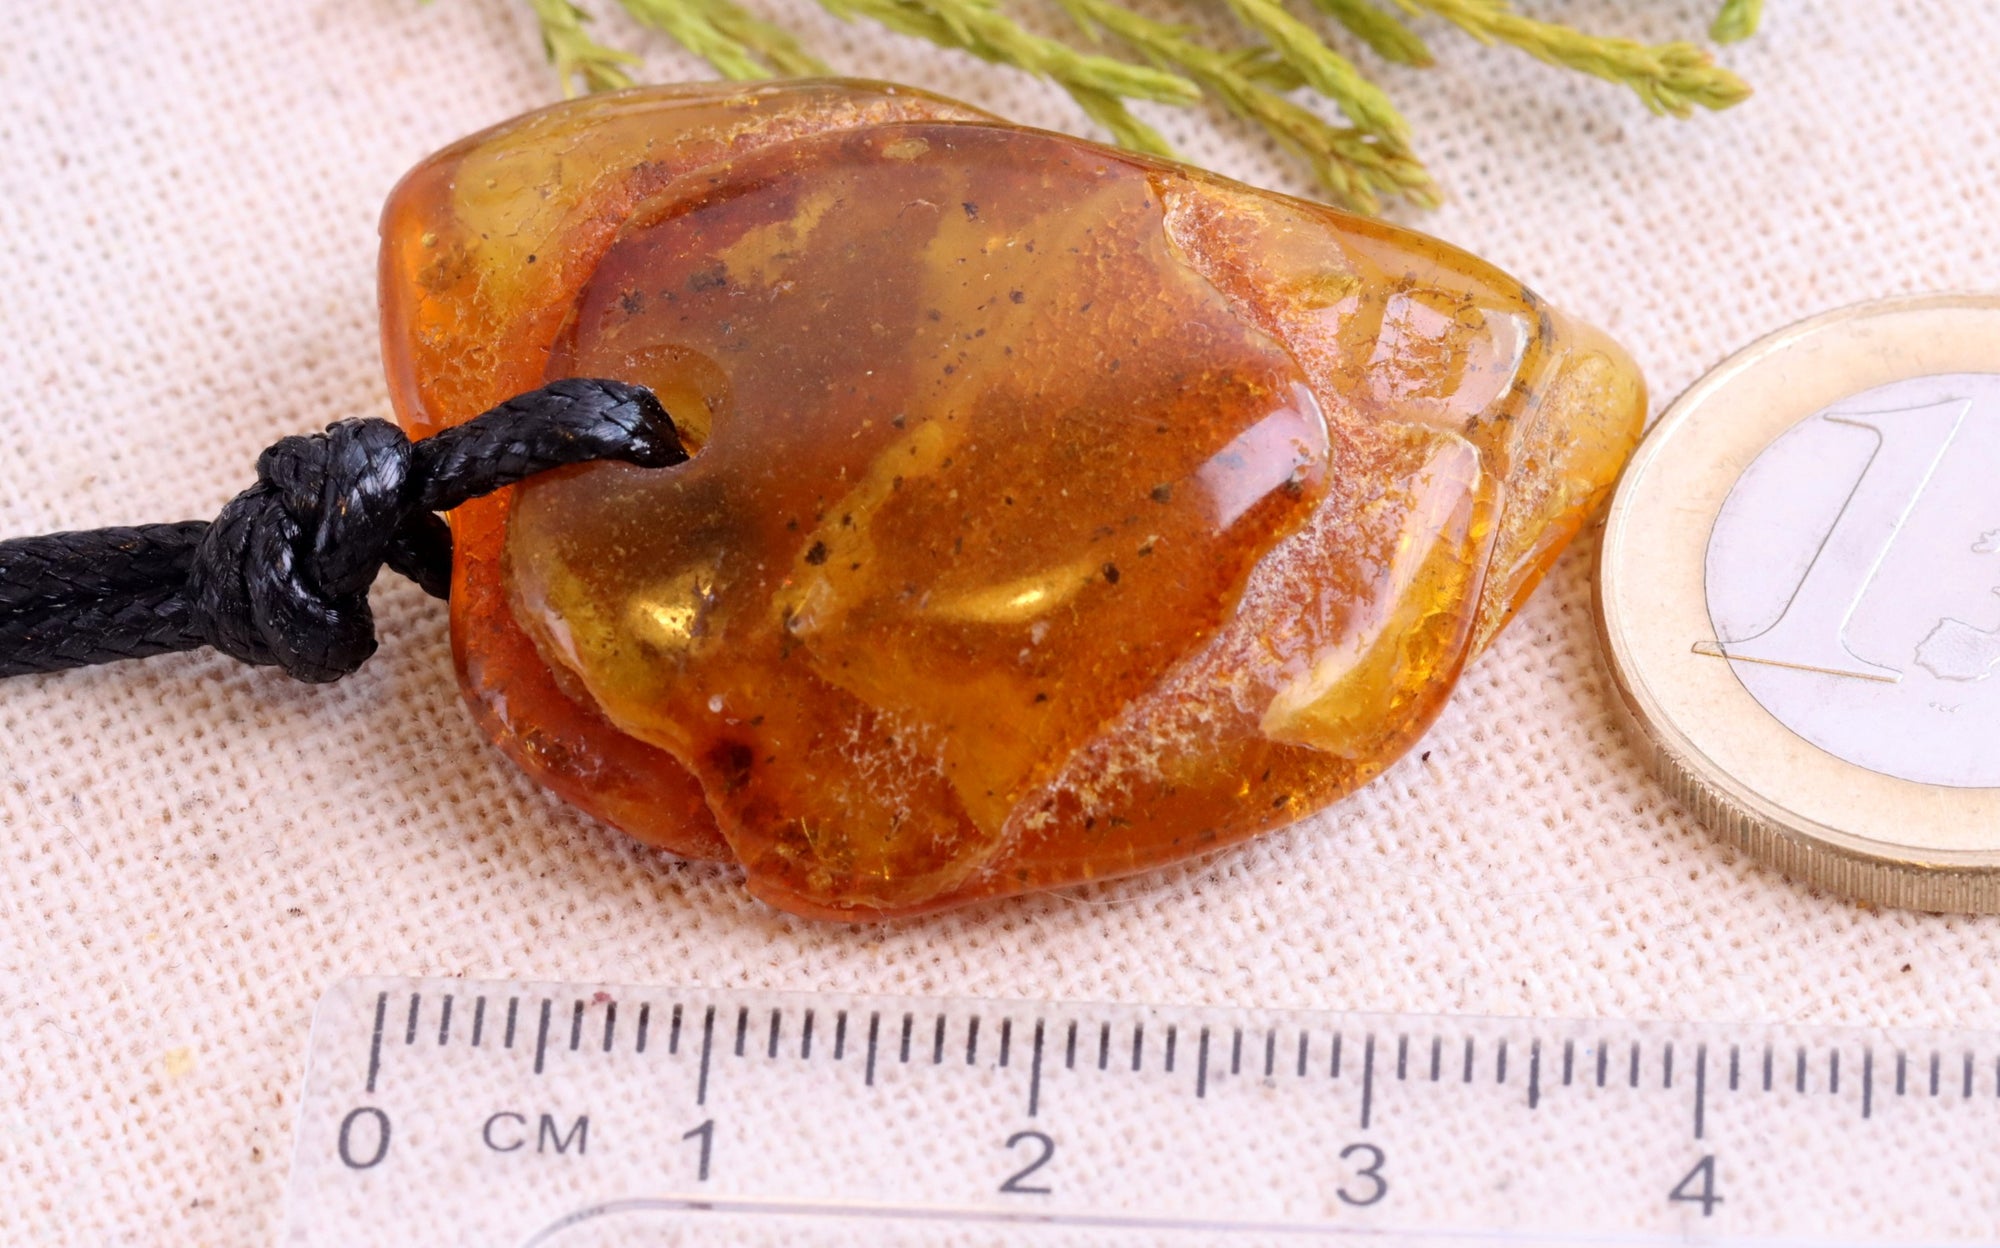 Insect in Amber 40 million year old Insect Inclusion Amulet